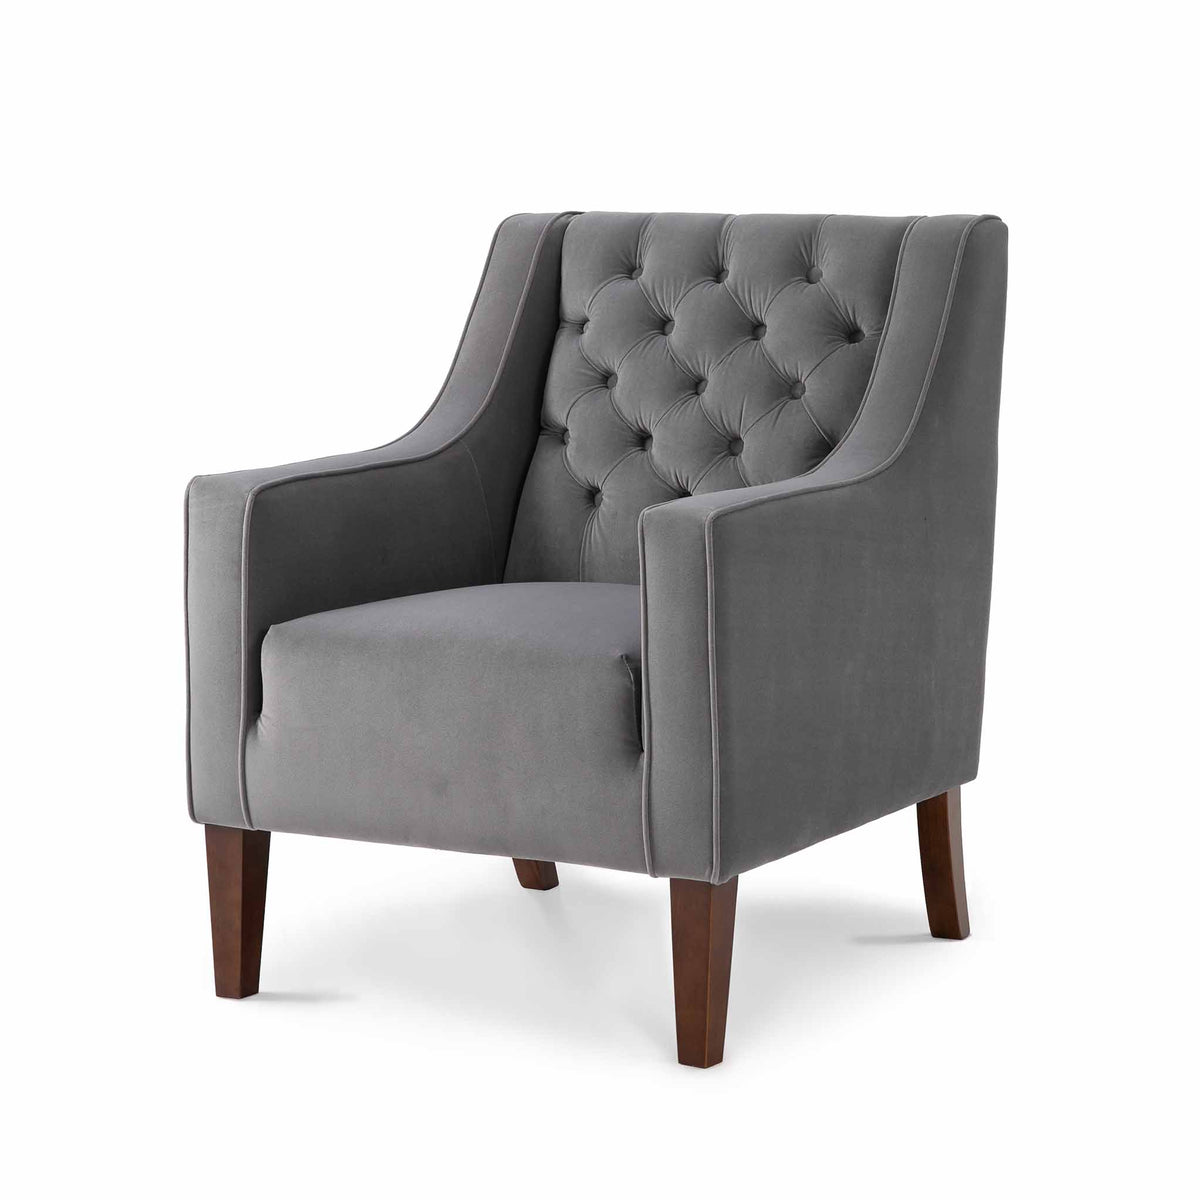 Eliza Grey Chesterfield Arm Chair - Side view